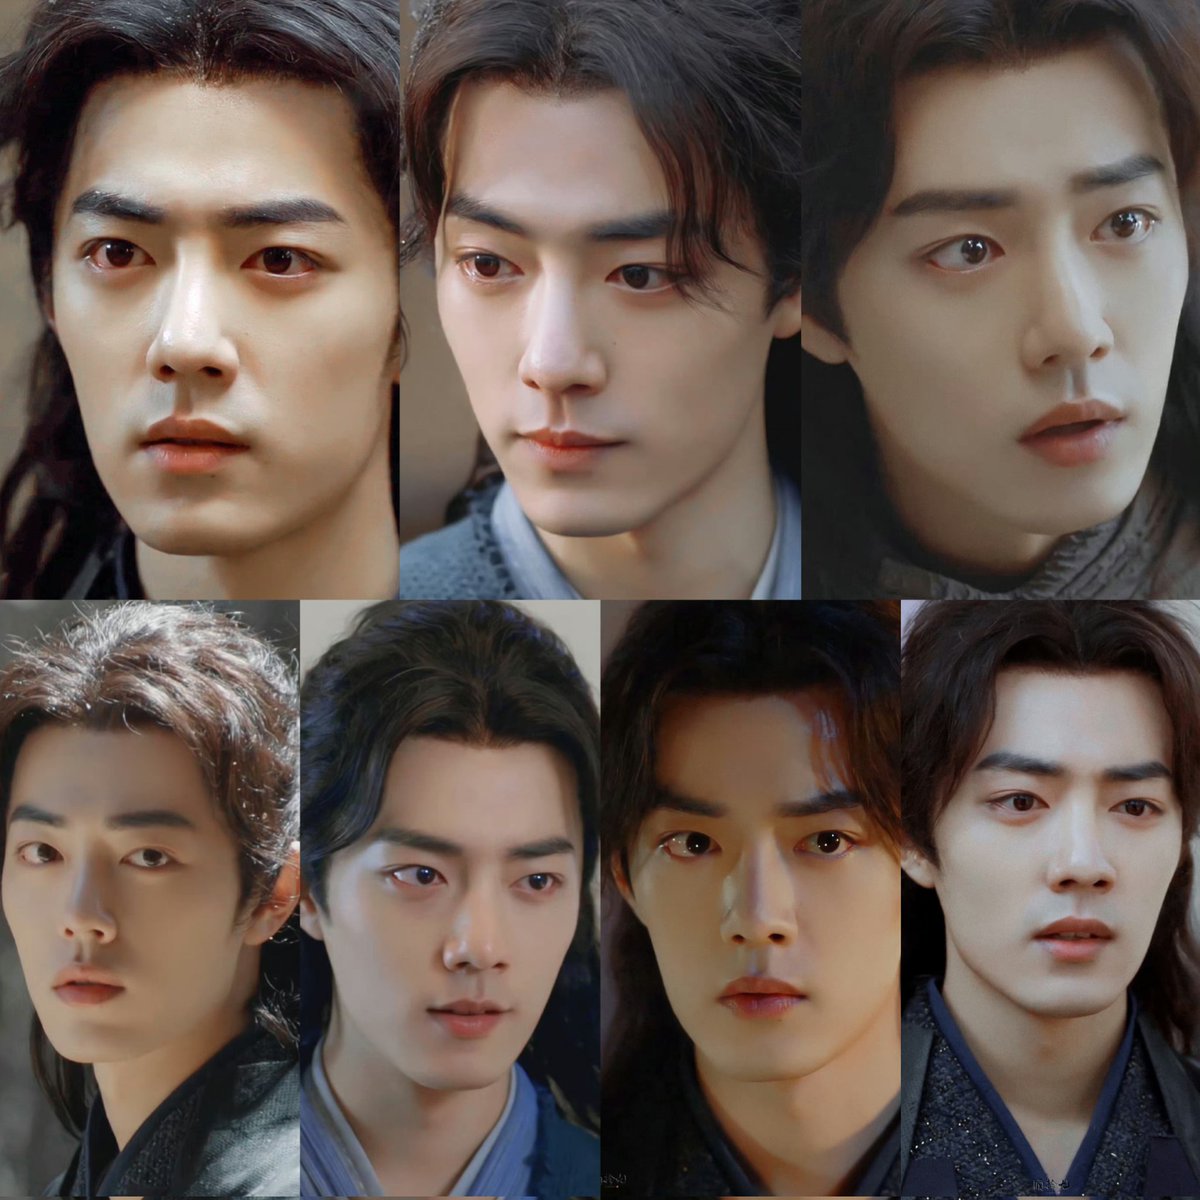 Handsome facecards of TangSan.....
#DouluoContinent #TangSan #XiaoZhanxTangSan #XiaoZhan